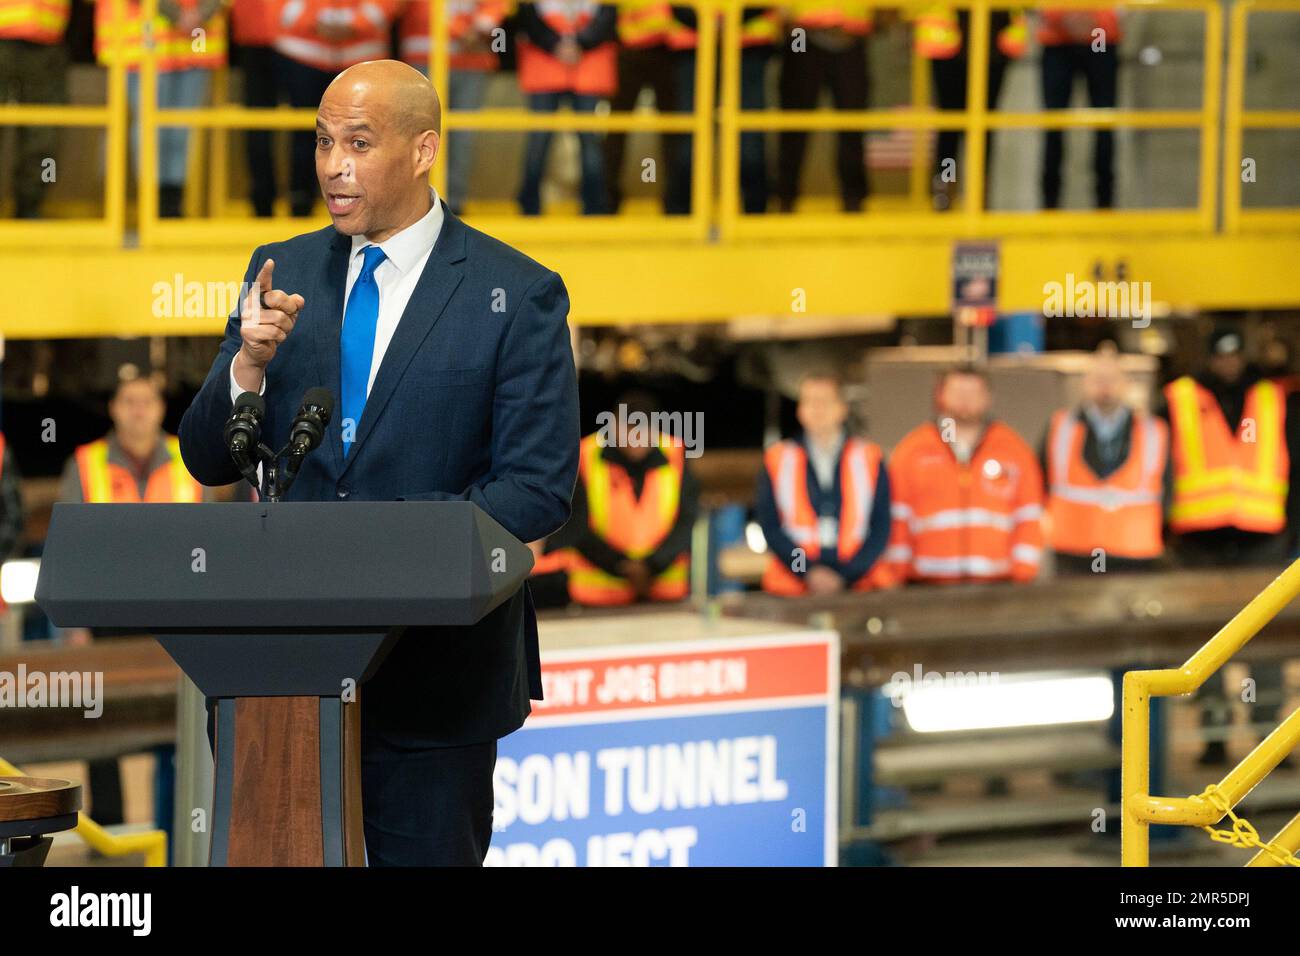 New York, NY, USA. 31st Jan, 2023. Cory Booker at the press conference for President Joe Biden Announces $292 Million “Mega Grant” Funding for Hudson Tunnel Project, Chelsea, Manhattan, west side, New York, NY January 31, 2023. Credit: Kristin Callahan/Everett Collection/Alamy Live News Stock Photo